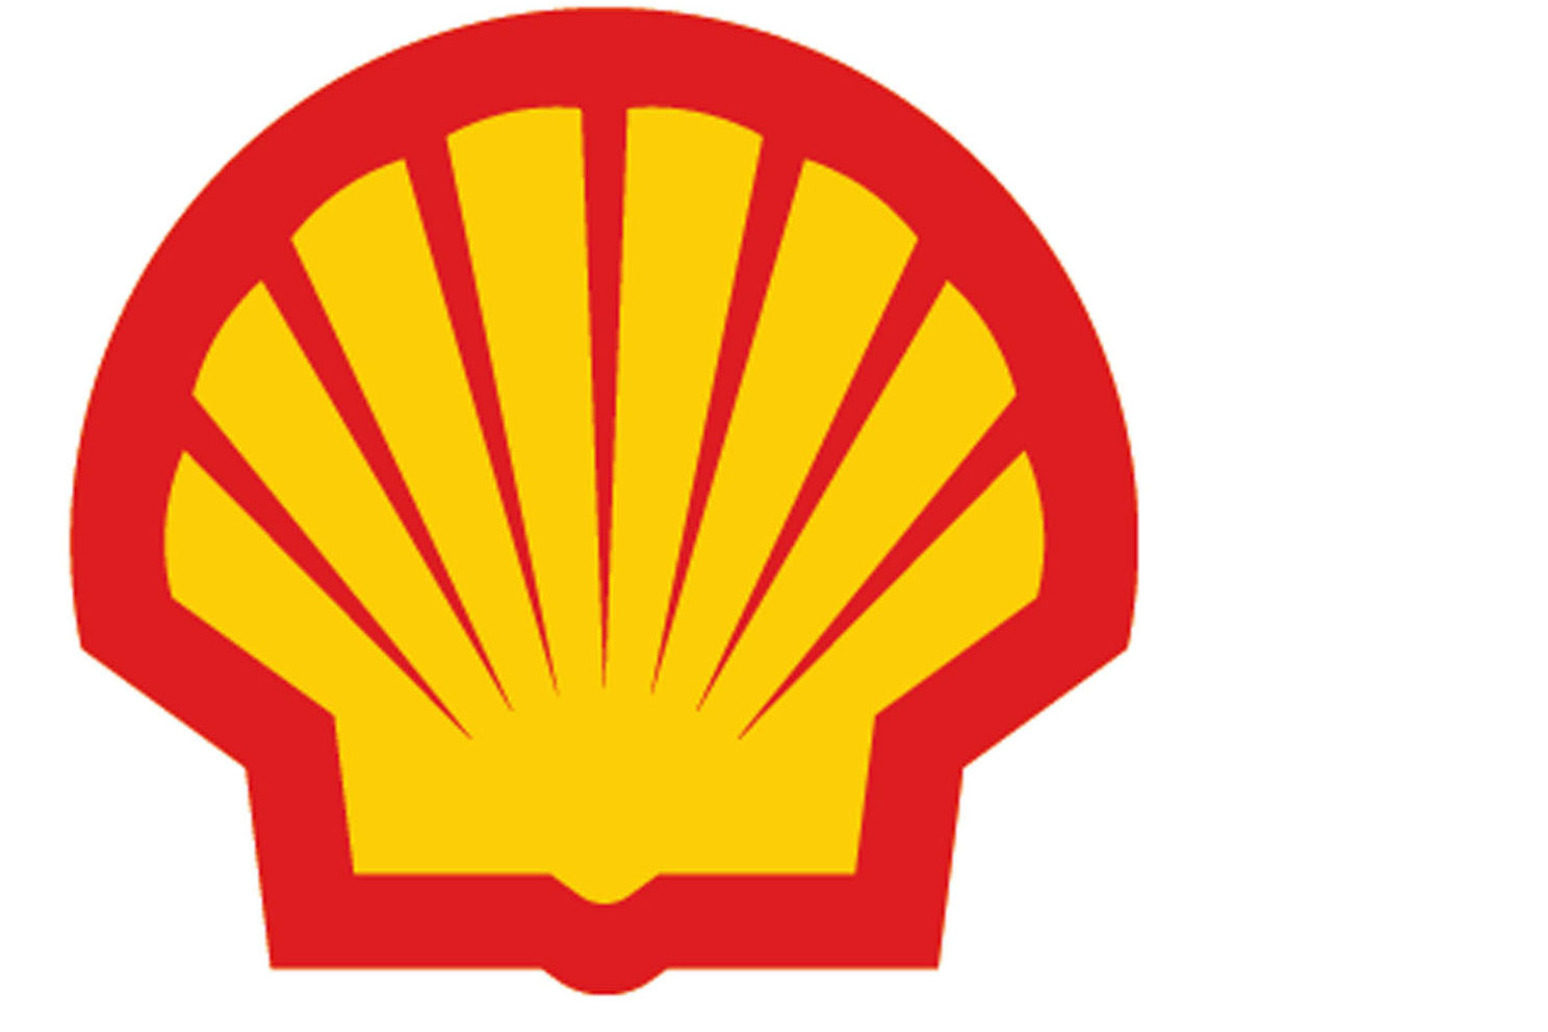 Shell Energy to pay £500,000 after overcharging thousands of price cap customers 